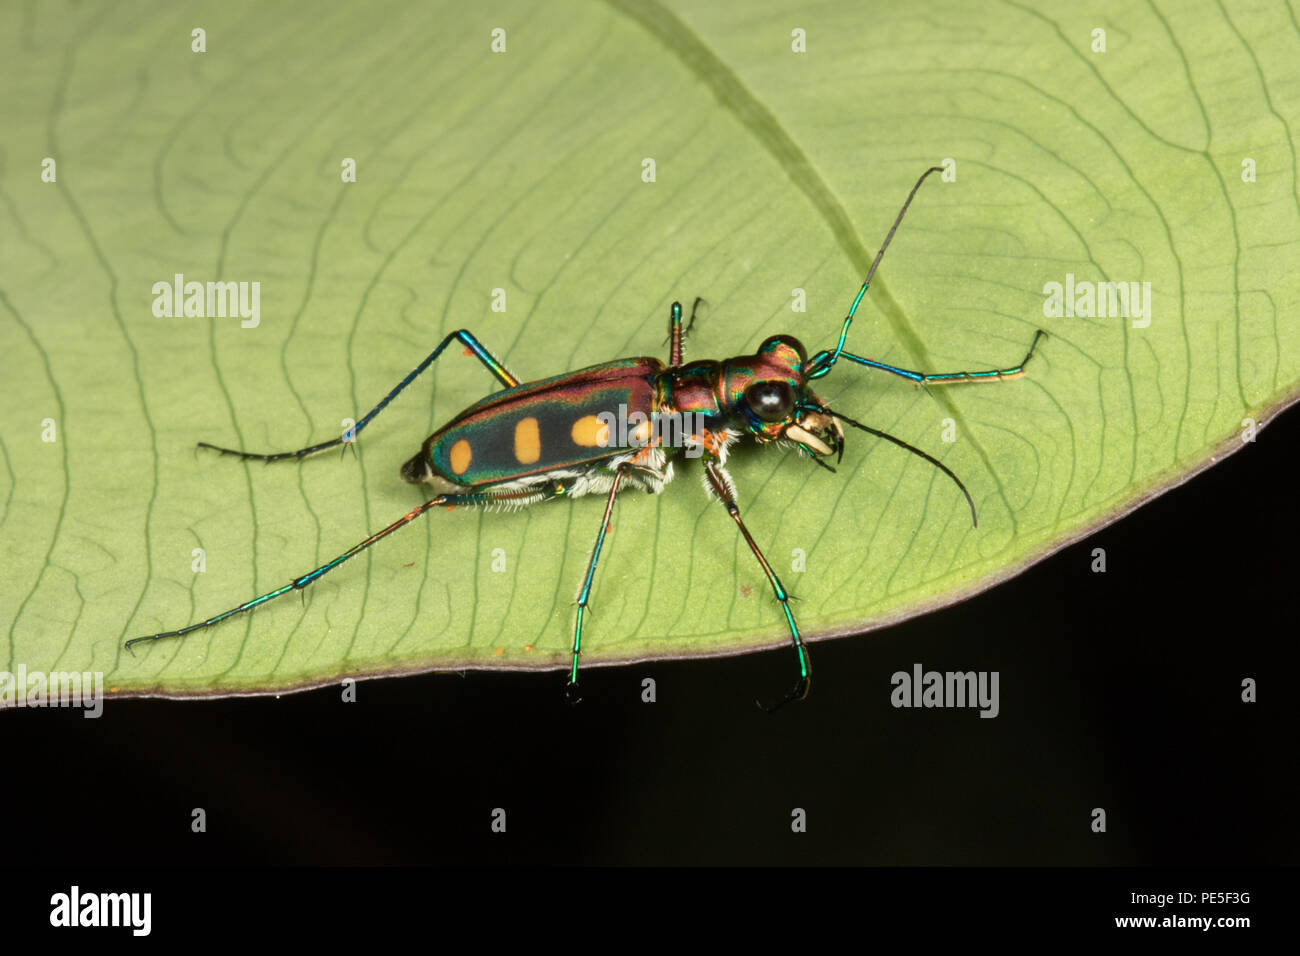 Cicindela aurulenta, common name Blue-spotted or Golden-spotted tiger beetle, is a beetle of the Carabidae family. Stock Photo